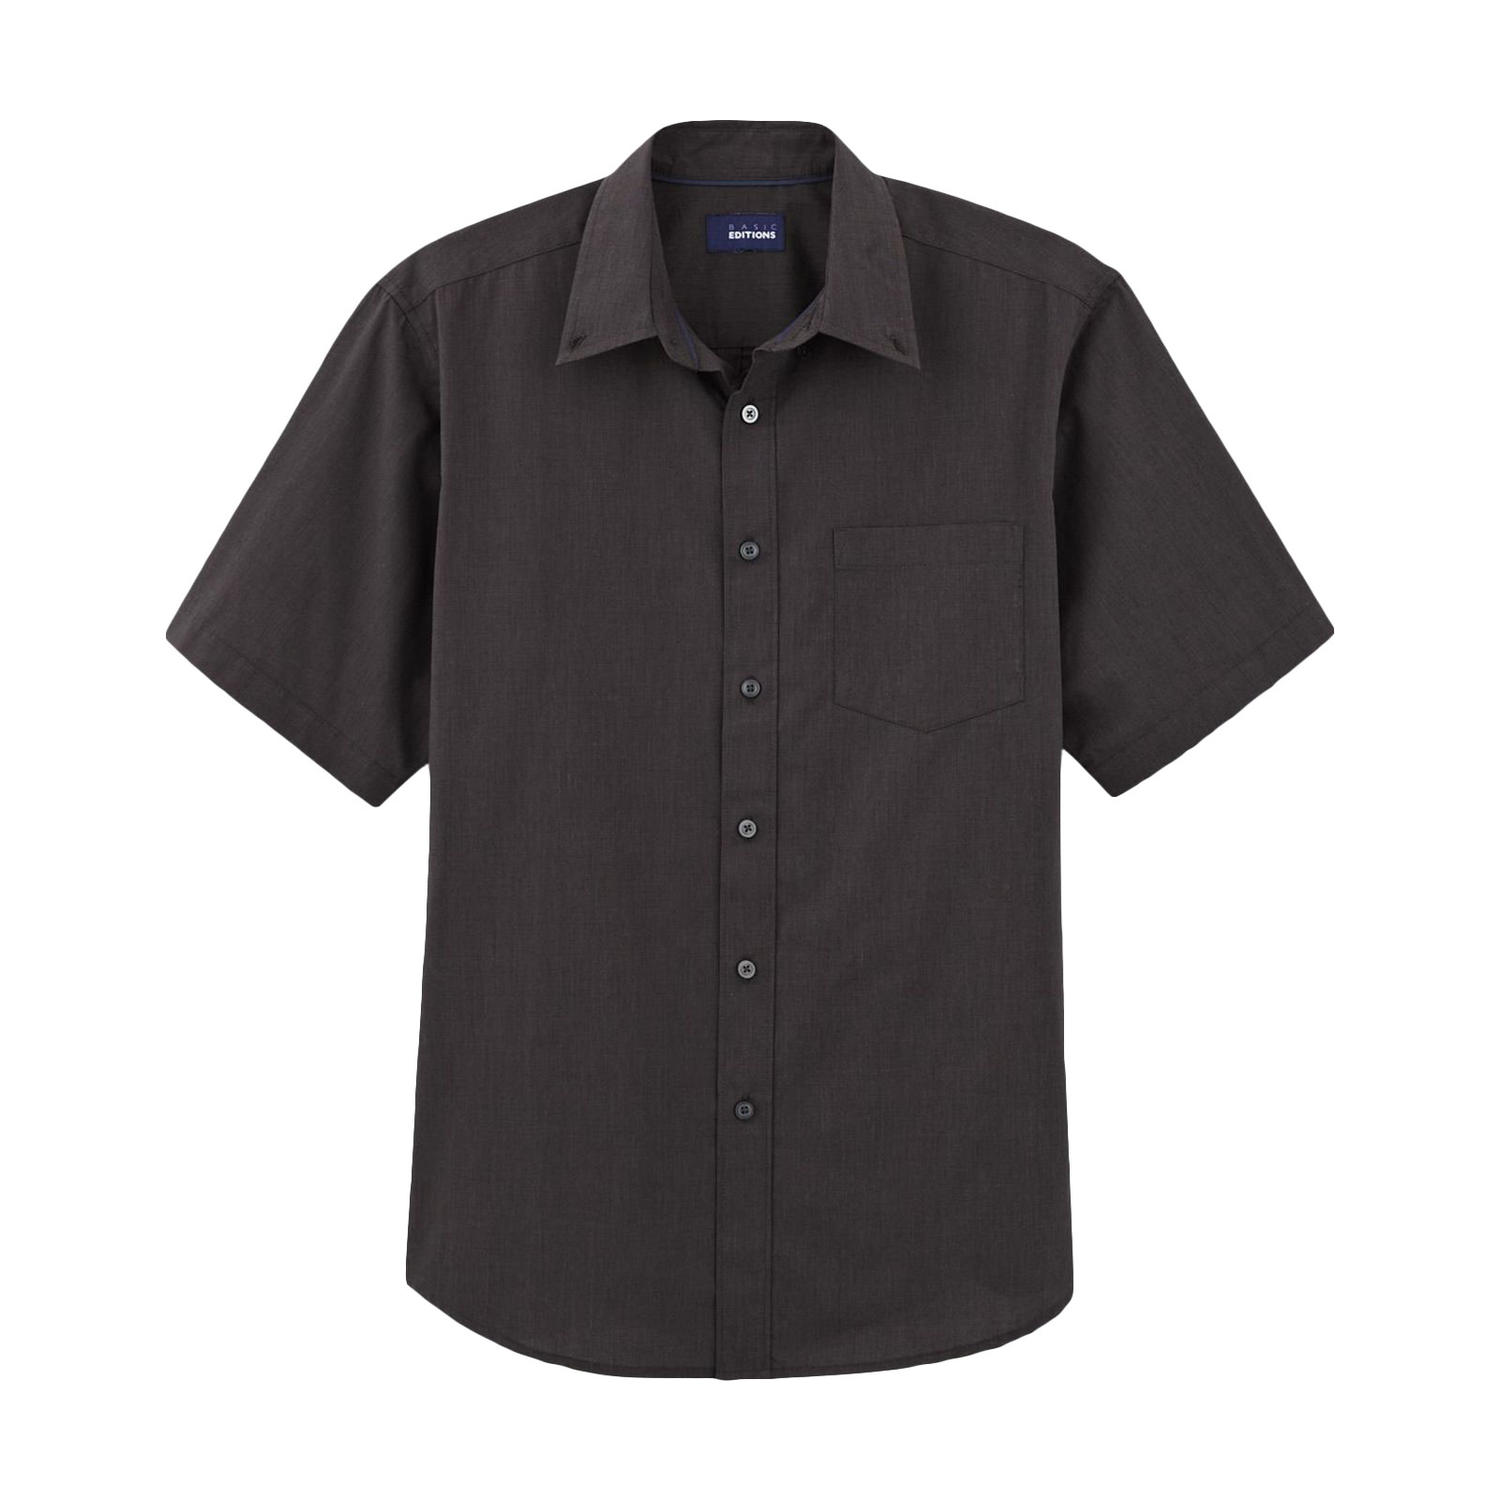 Basic Editions Men's Easy Care Woven Shirt